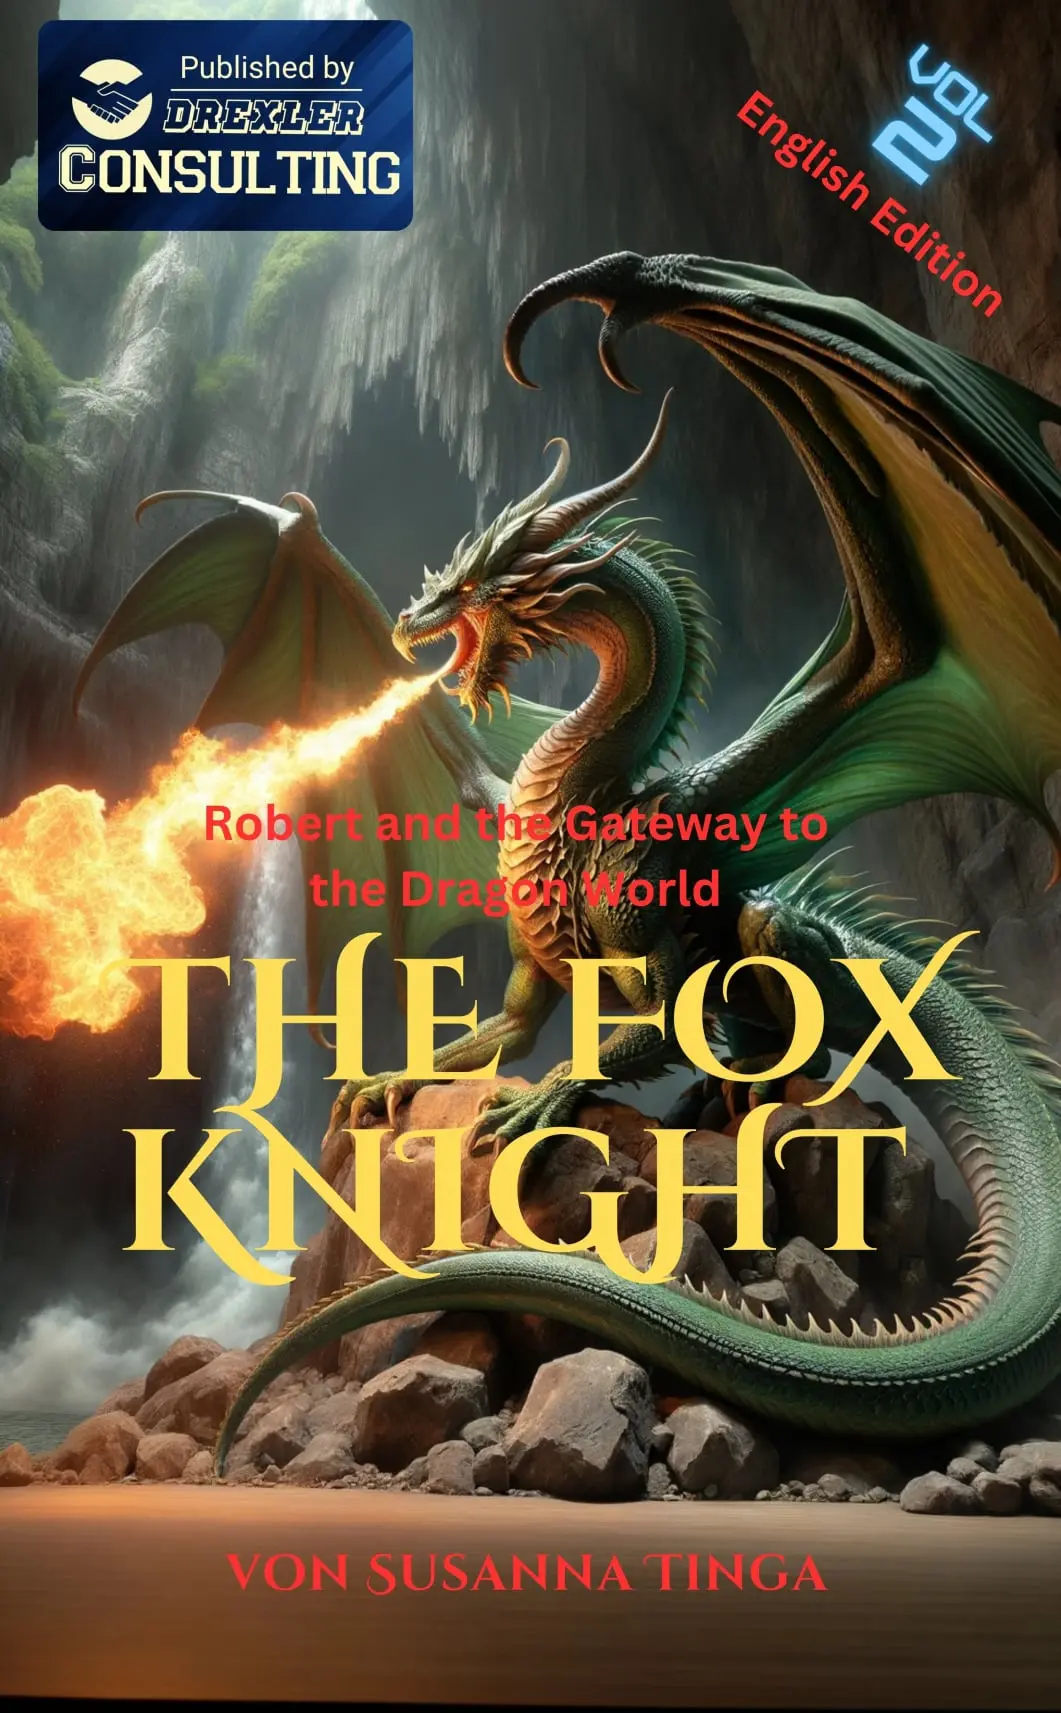 The Fox Knight vol2 Robert and the Gateway to the Dragon World